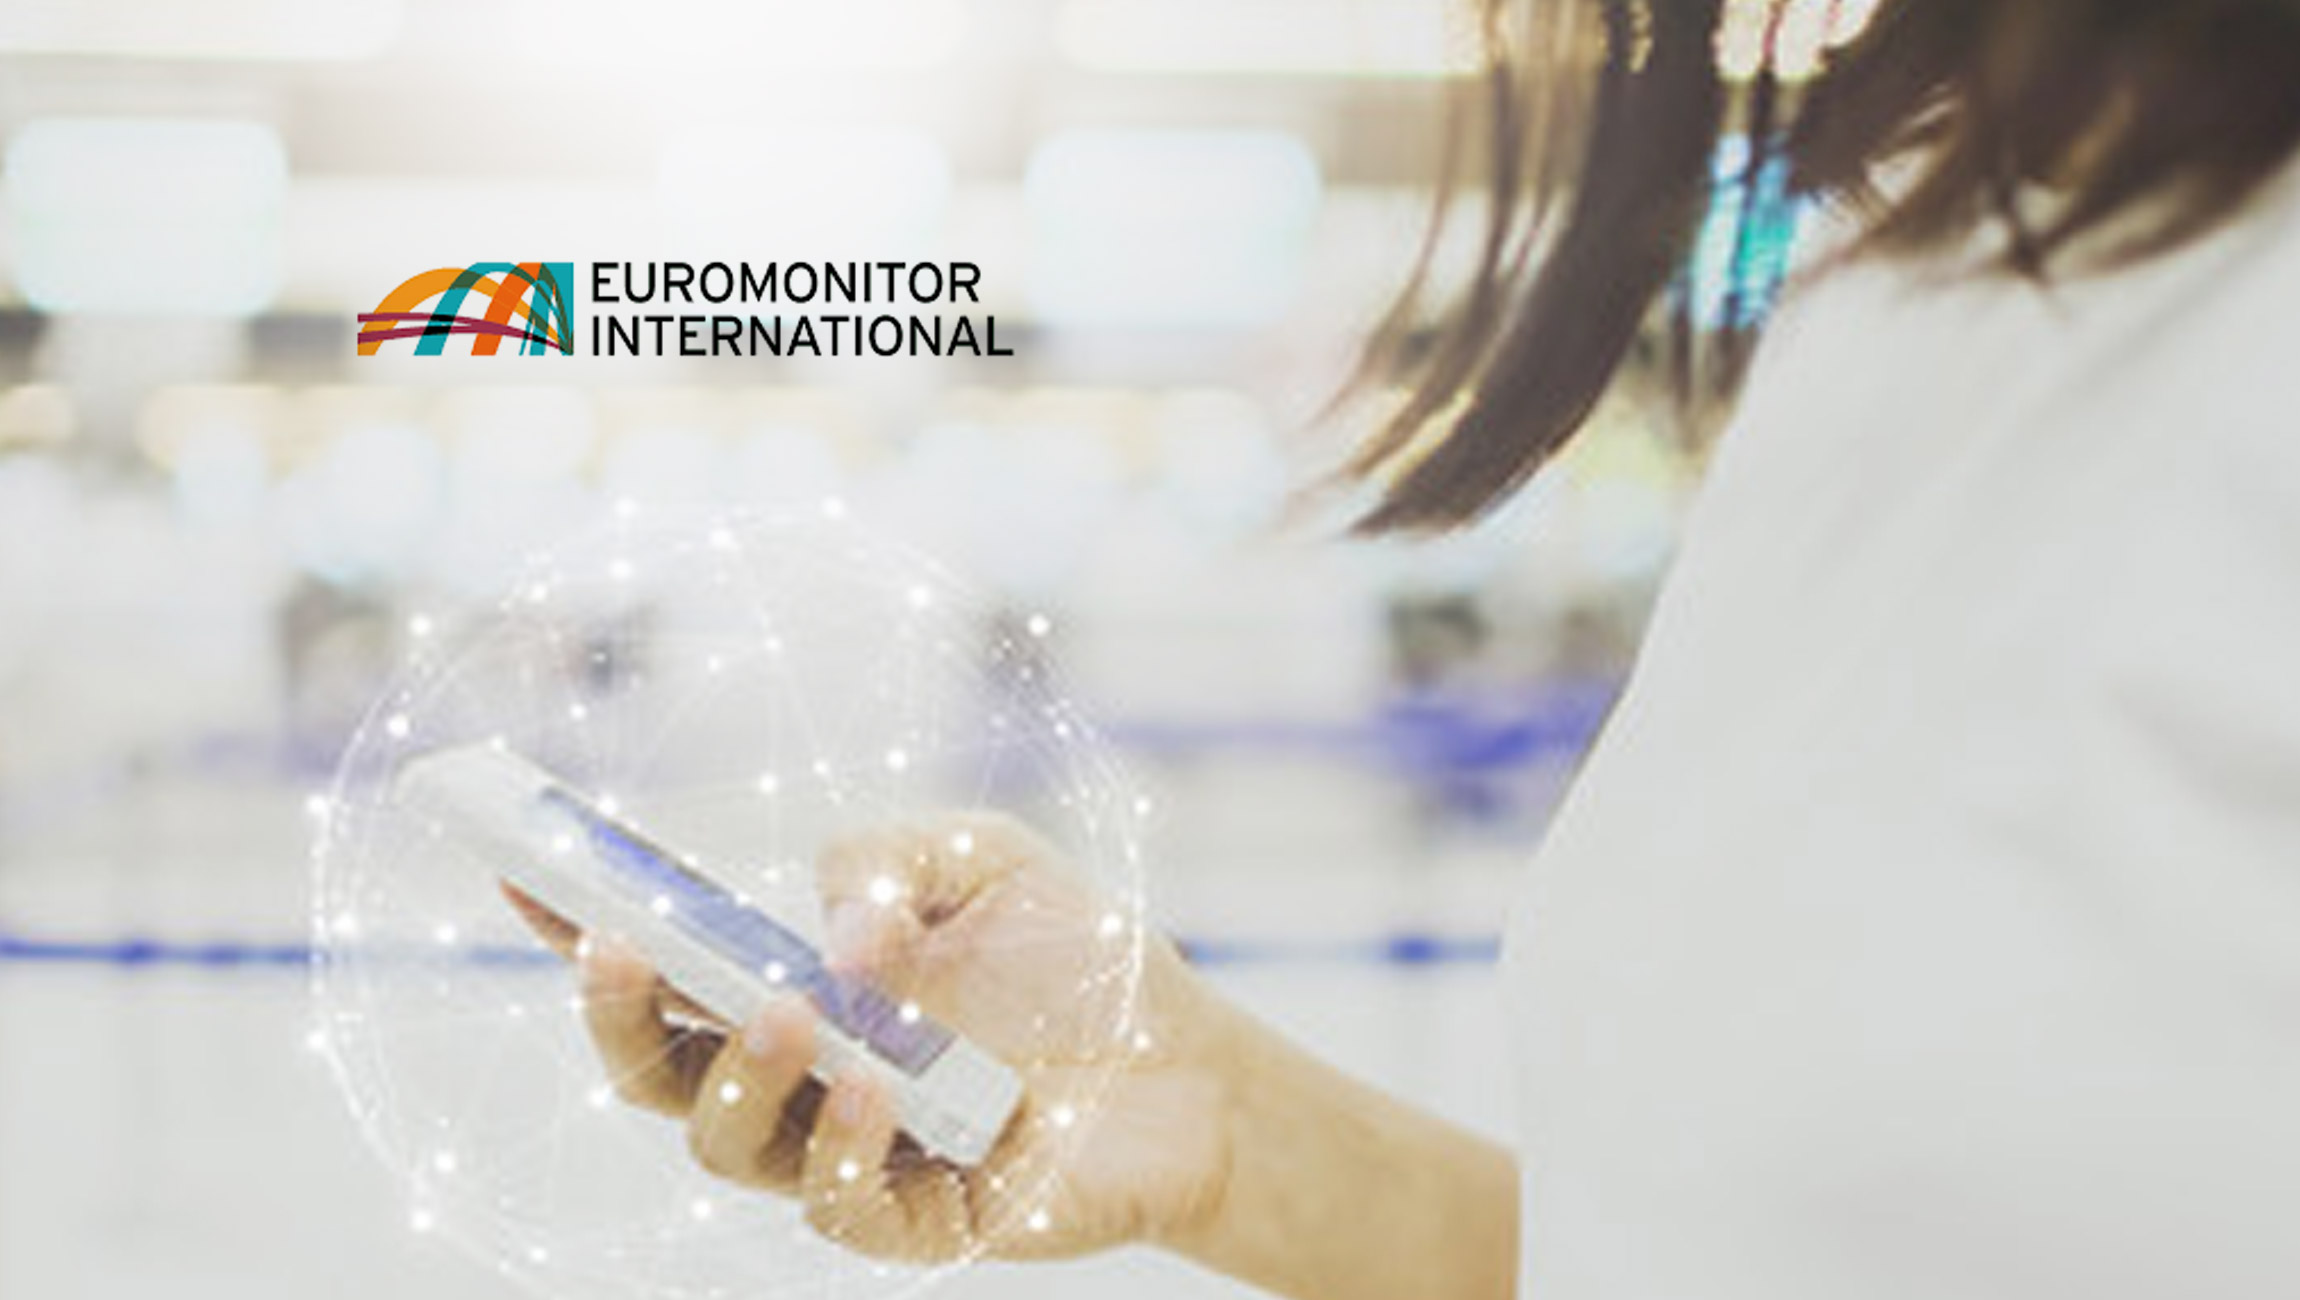 Euromonitor Reveals the Top 10 Global Consumer Trends In 2022